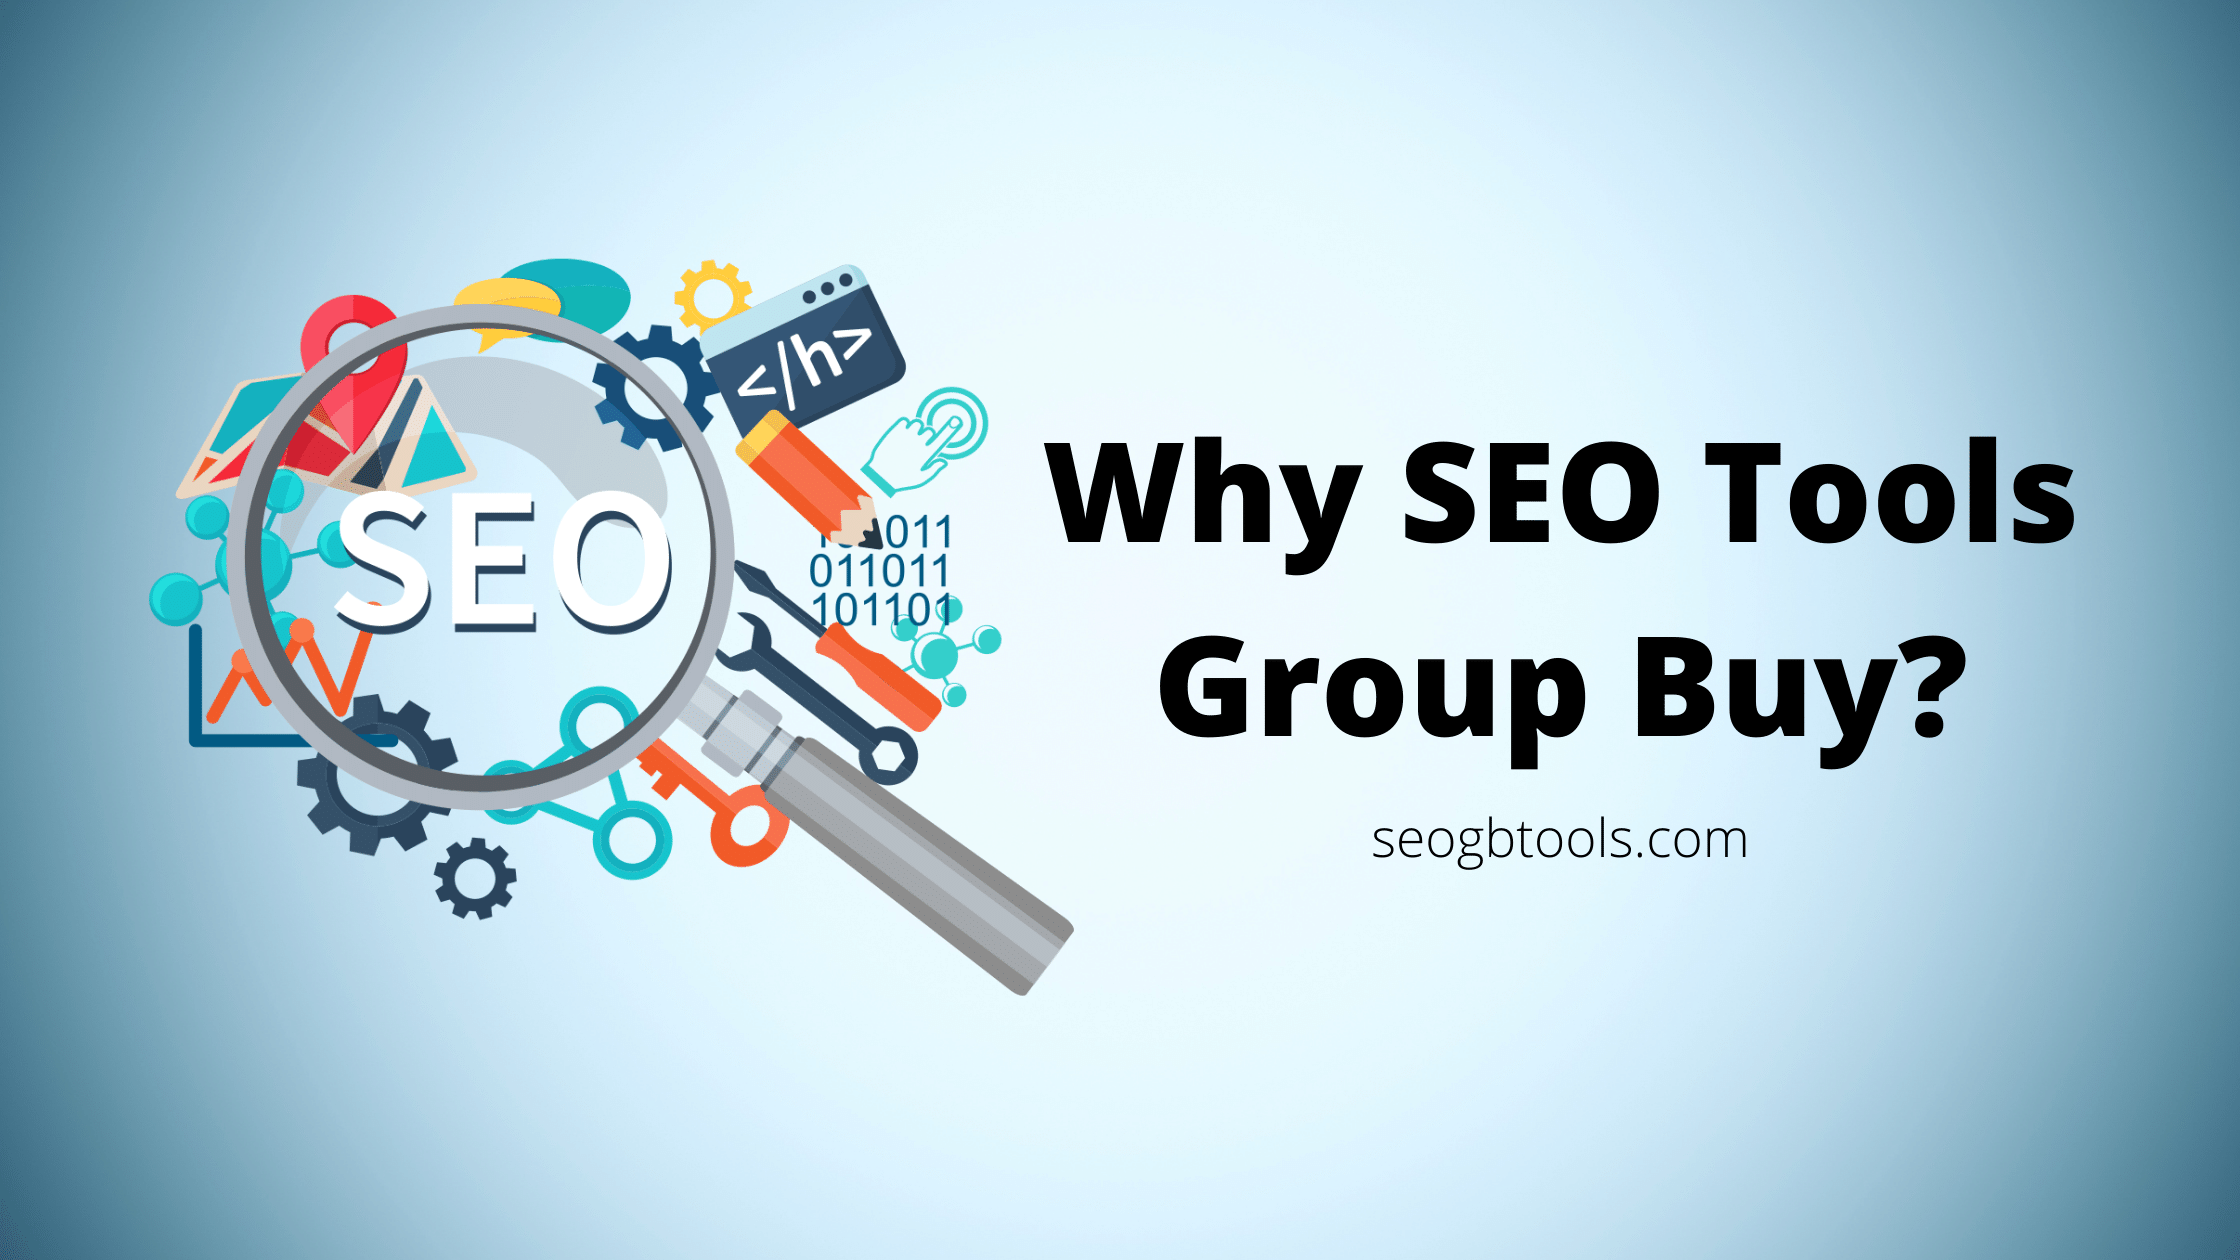 Why SEO Tools Group Buy?